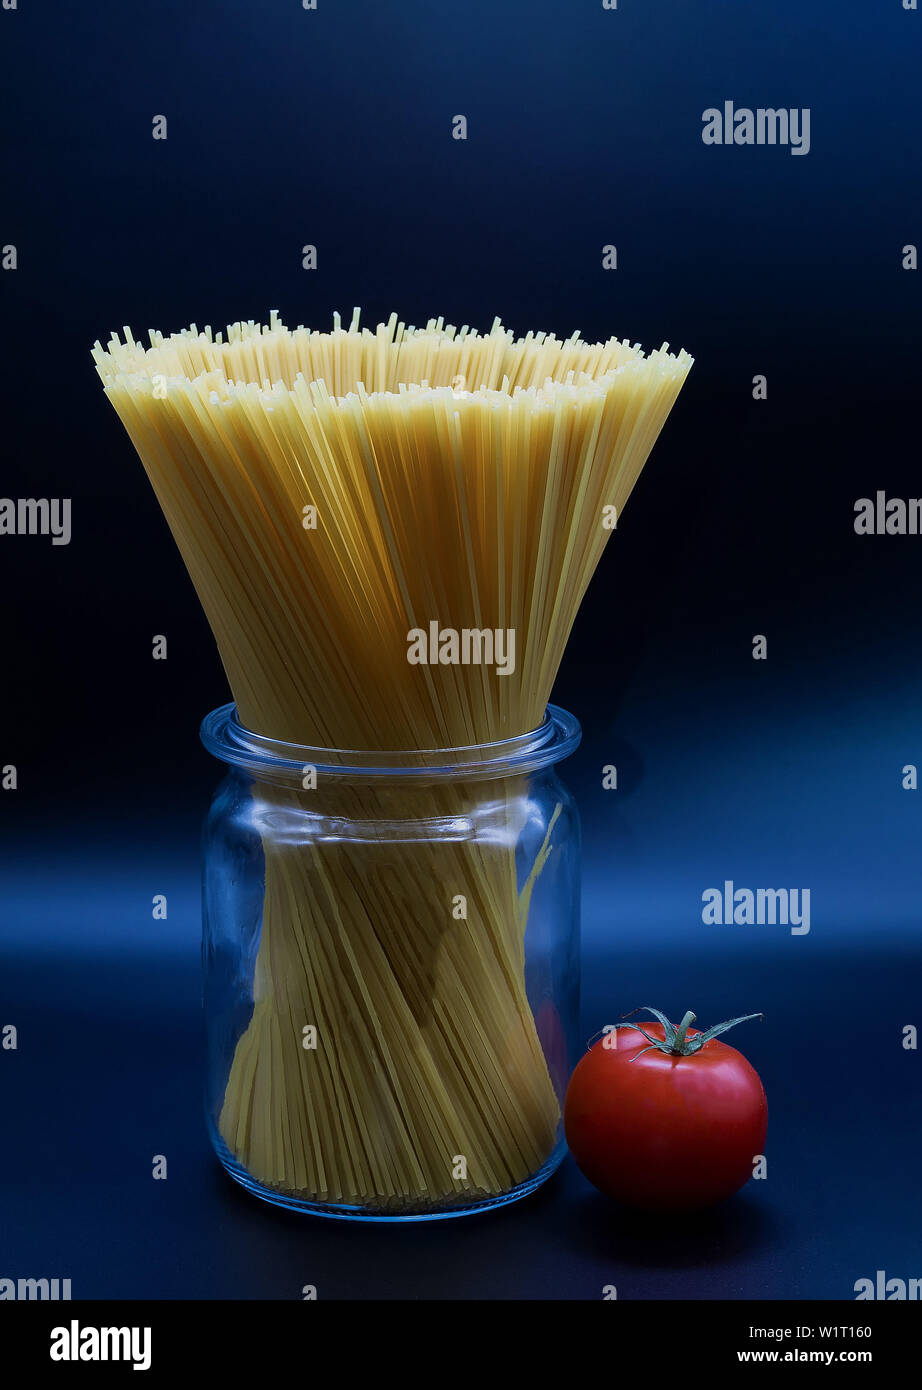 spaghetti standing in a trasparent glass jar on a blue background and a ripe tomato lying next to the can is close shot in the studio Stock Photo